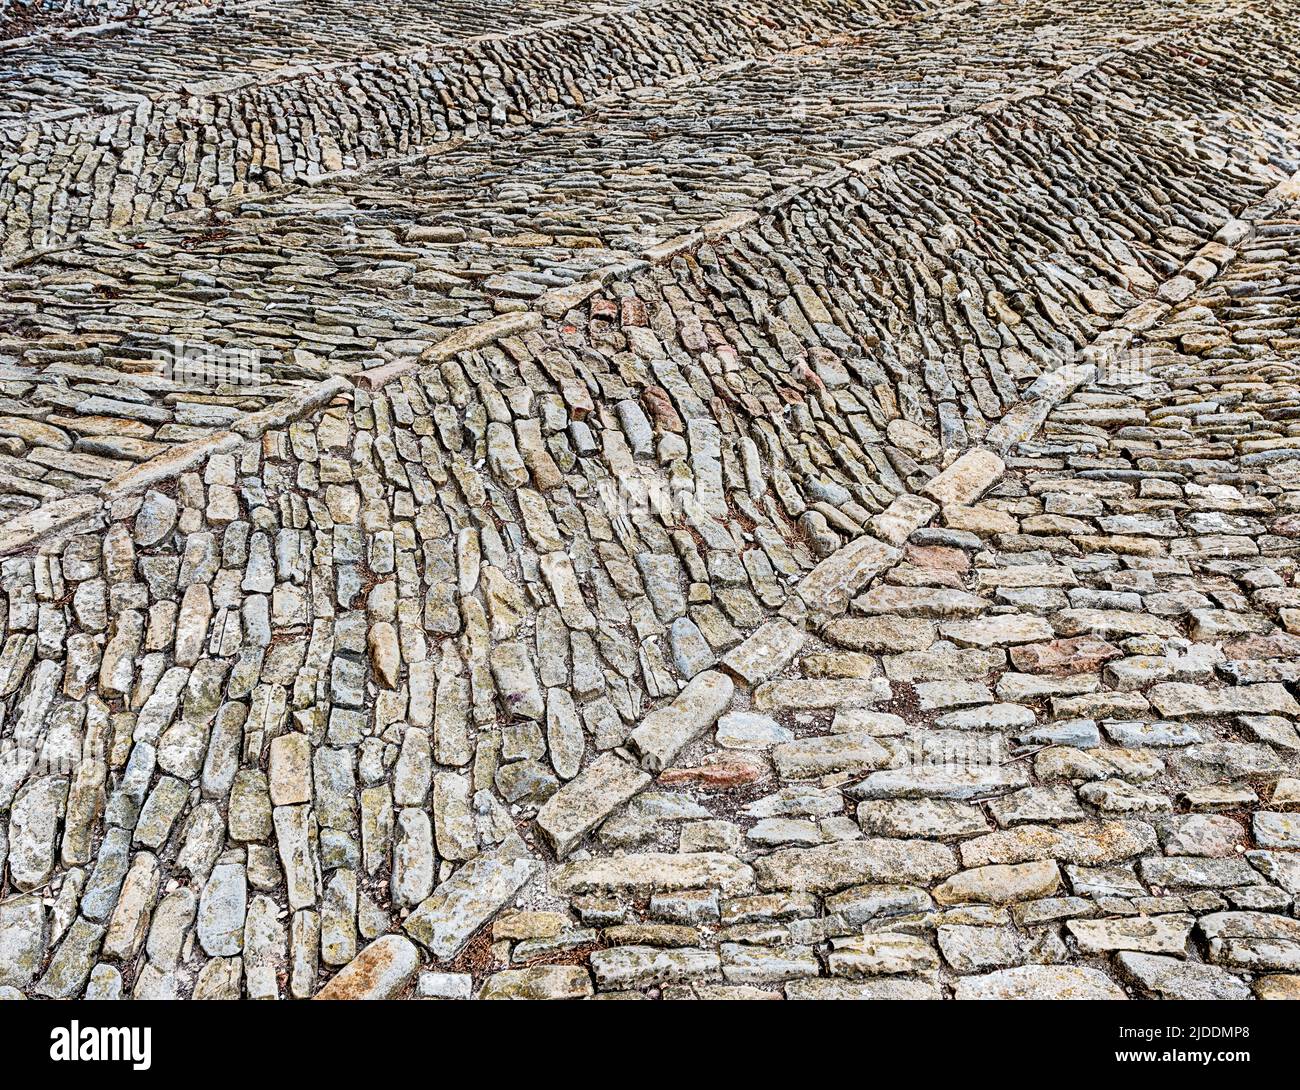 Courtyard stones are arranged in an interesting pattern at the castle in Serralunga. Stock Photo